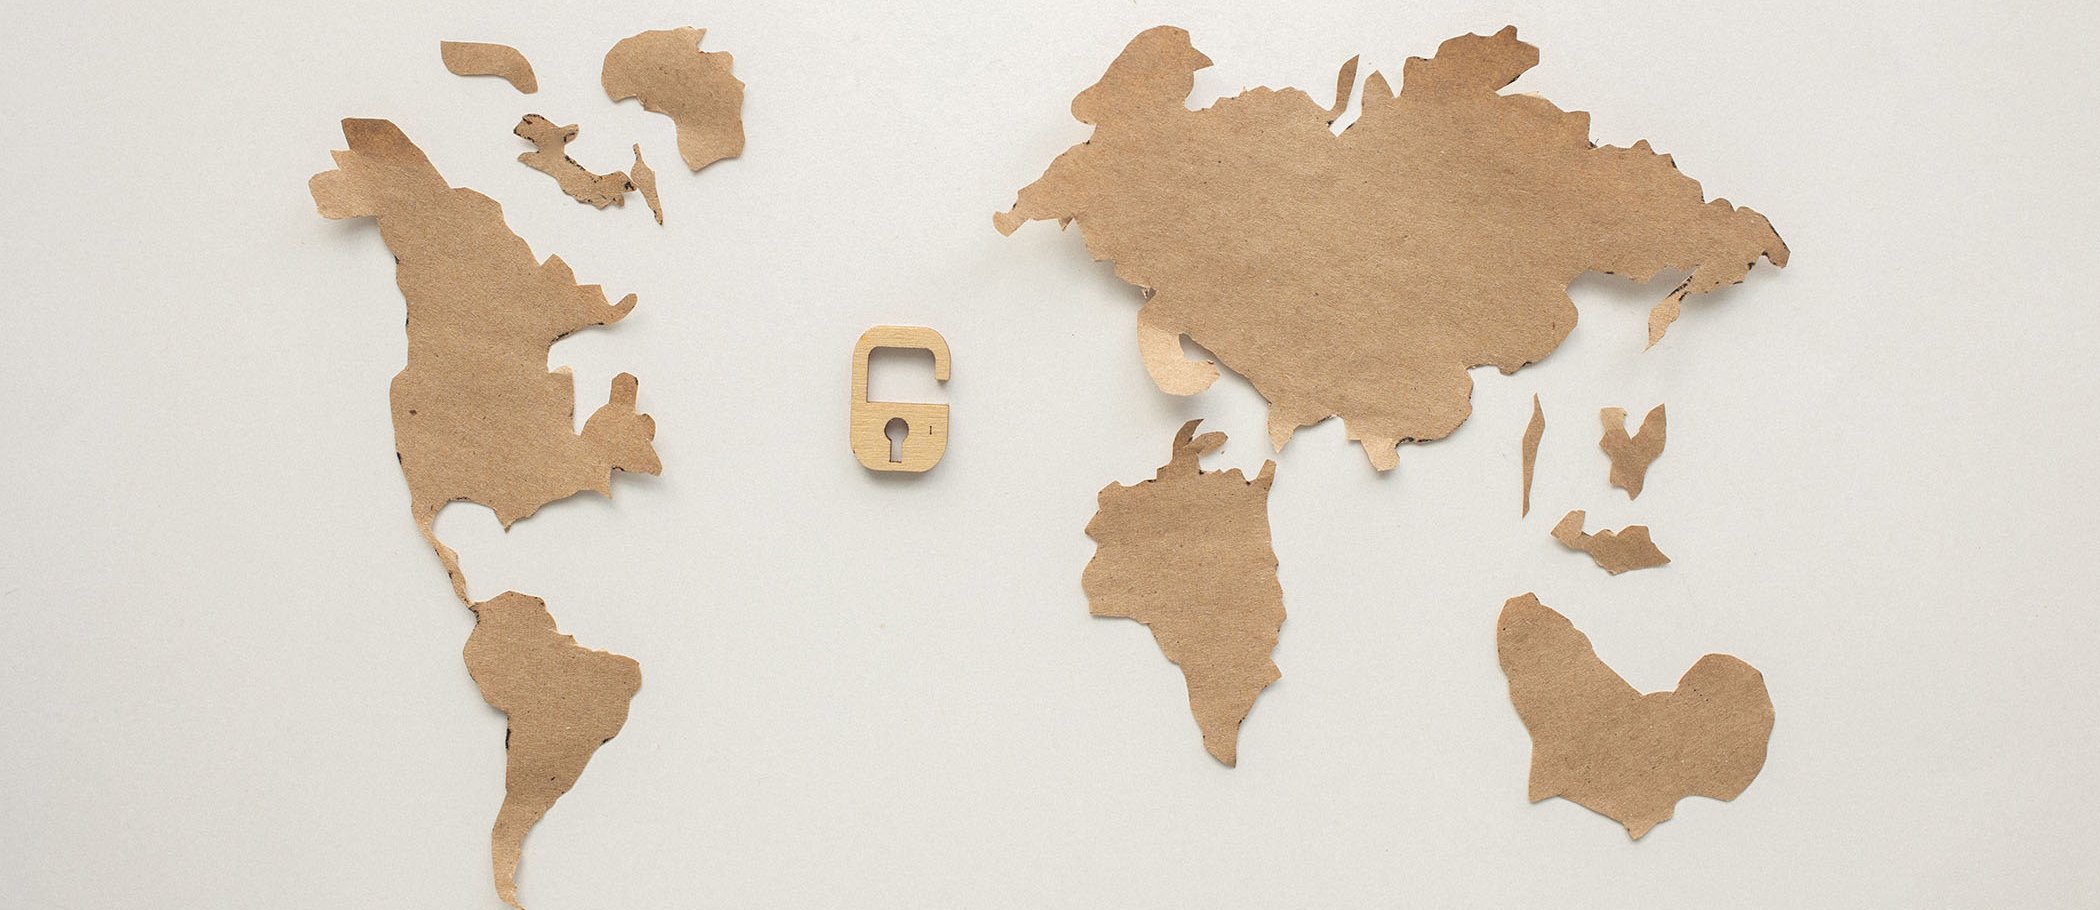 A world map with an open padlock in the middle, both made of cardboard